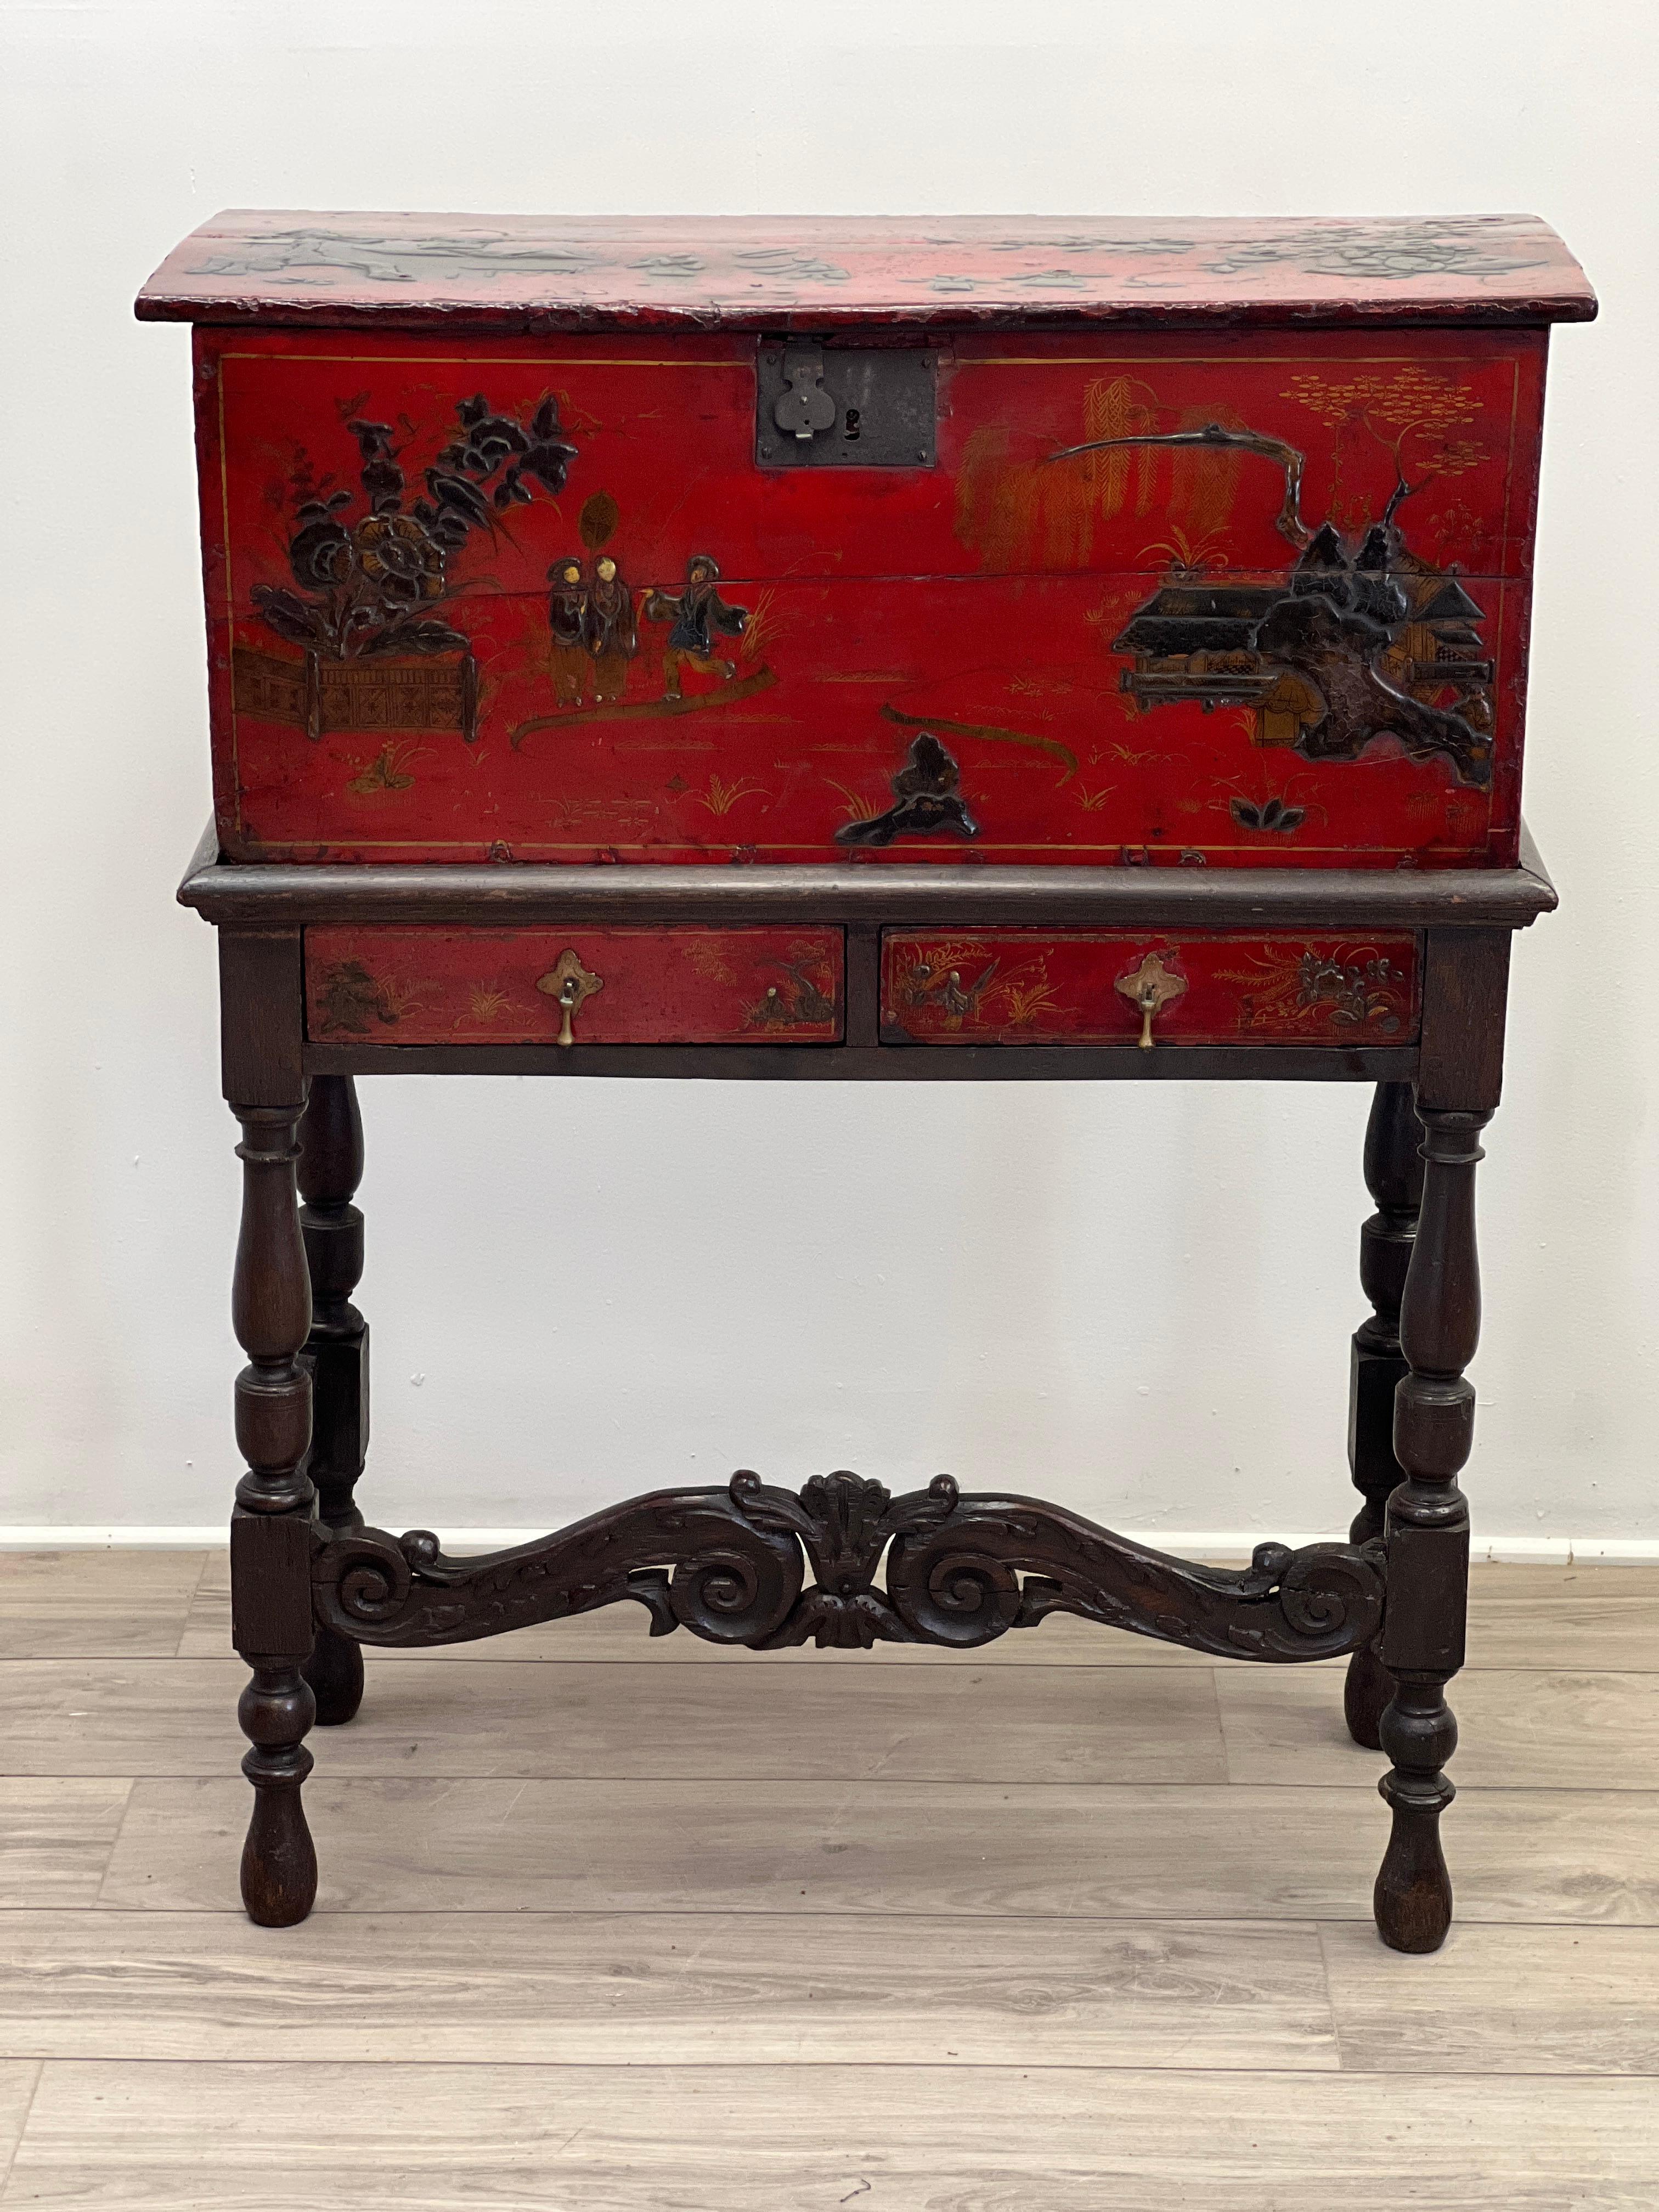 Featured is an extremely rare 17th century Dutch William & Mary Chinoiserie style coffer trunk on stand. This gorgeous piece was constructed of oak in the traditional William and Mary style. The trunk is japanned with red lacquer and was hand